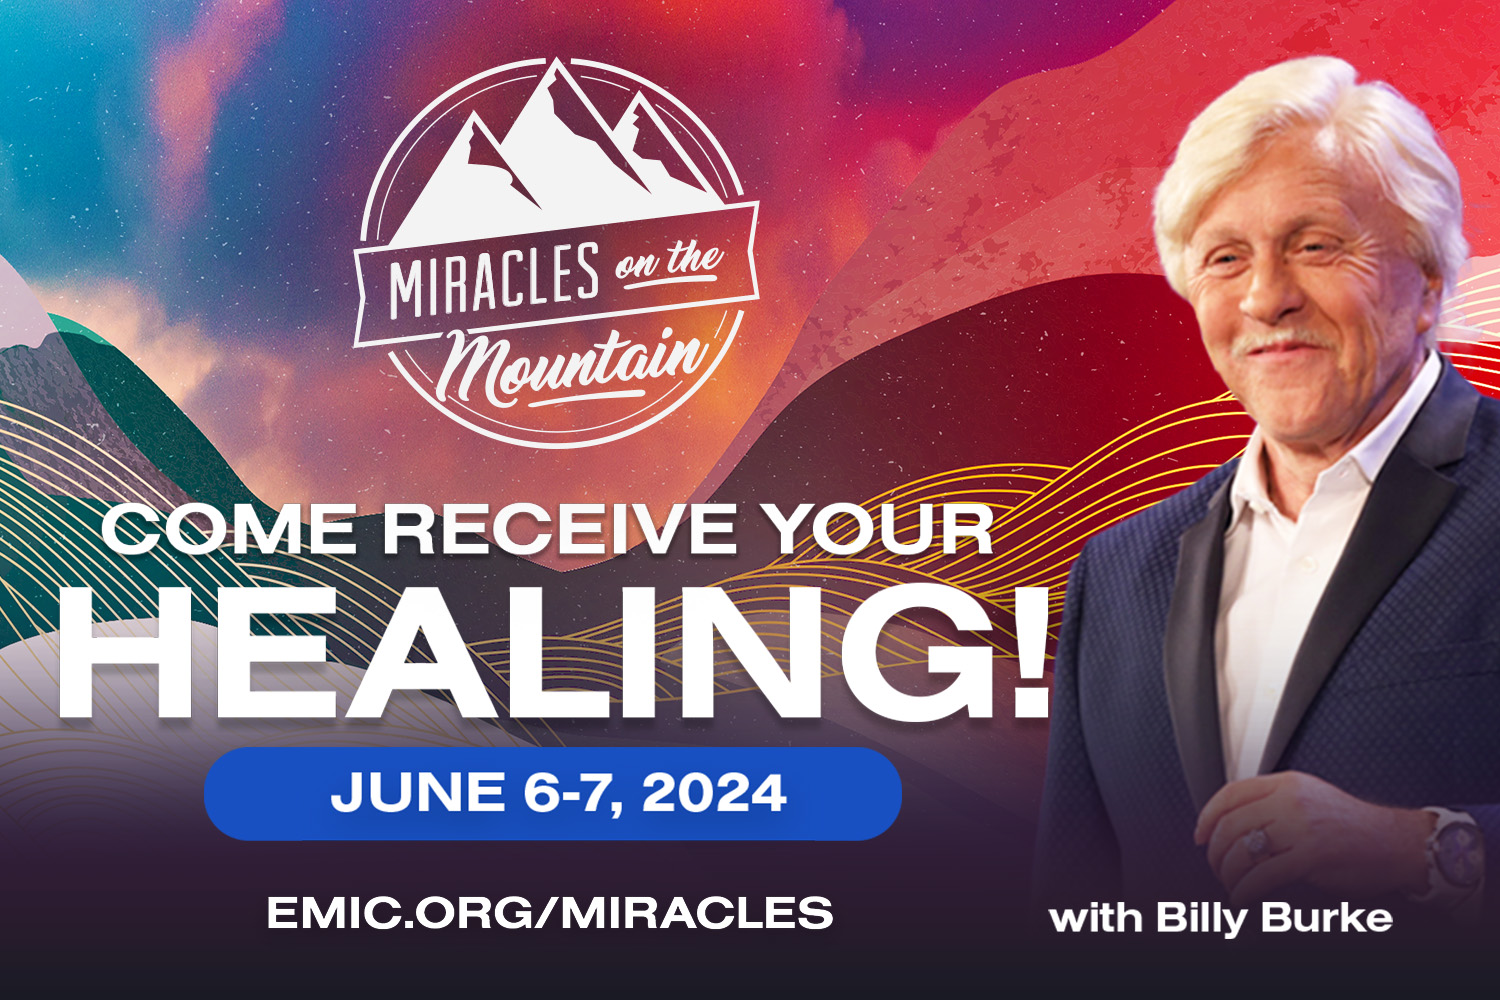 Join us for Miracles on the Mountain!